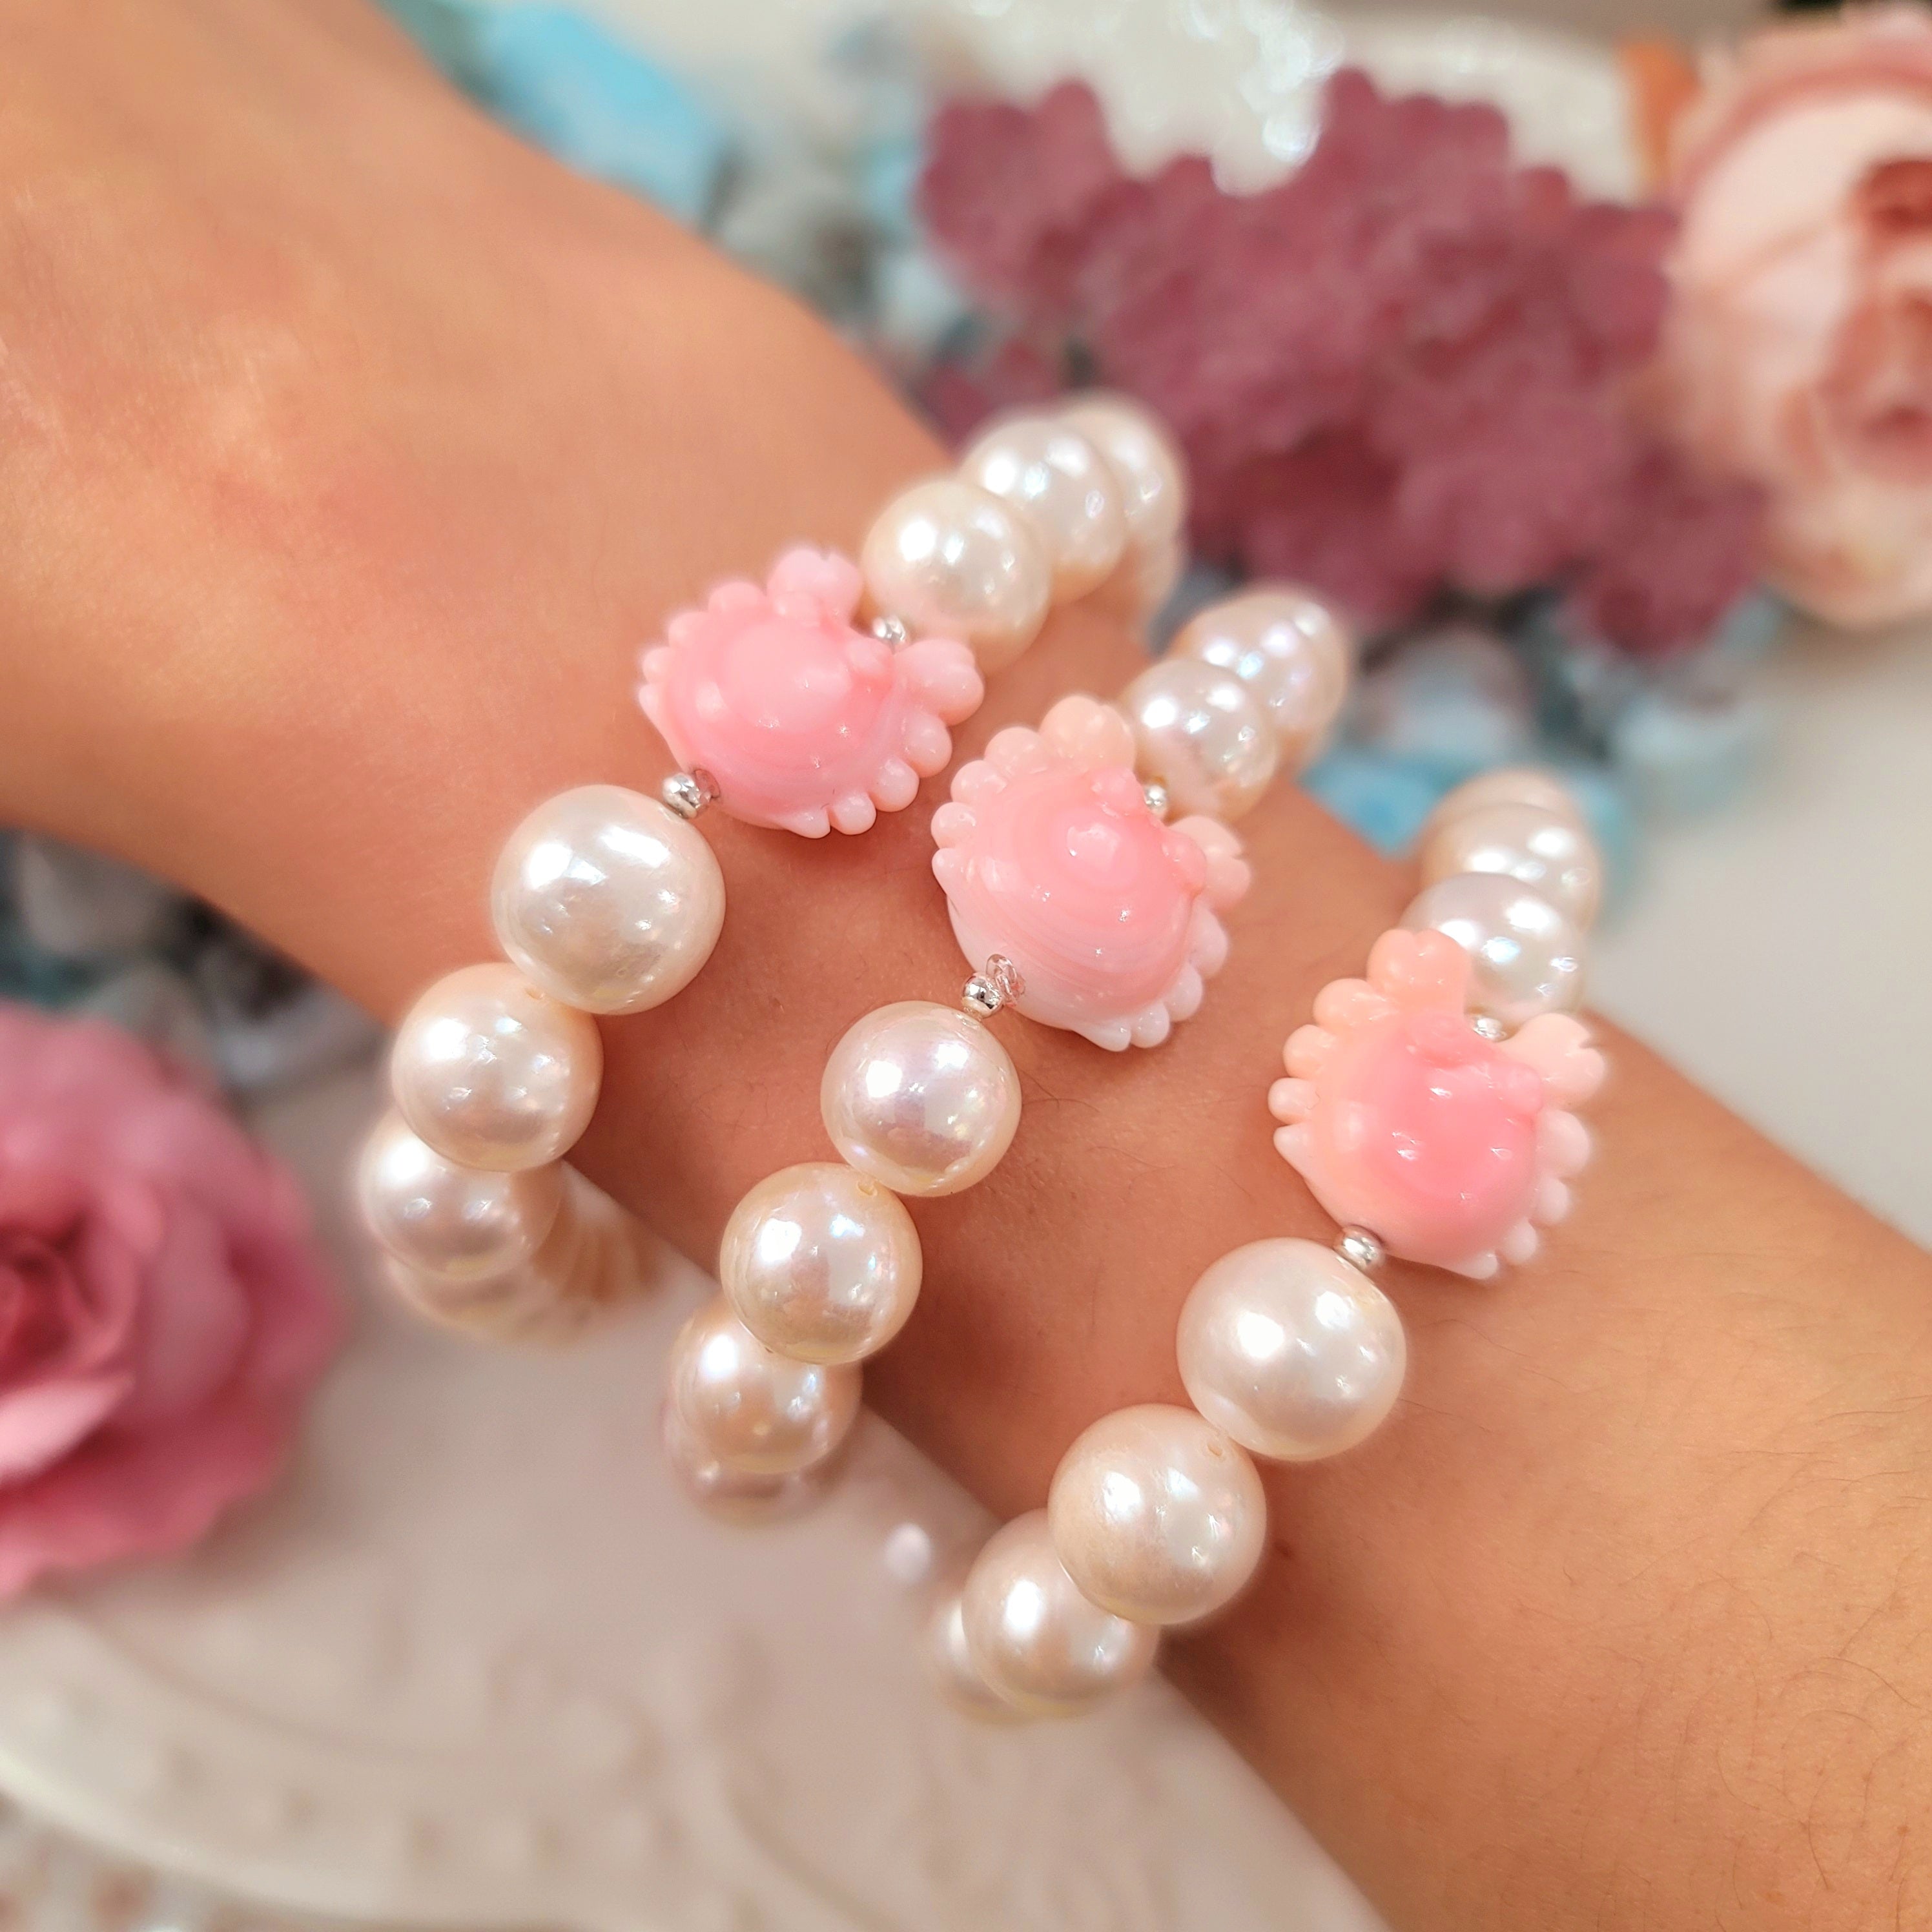 Conch Shell Crabbie with Freshwater Pearls Bracelet for Abundance, Honesty and Wisdom